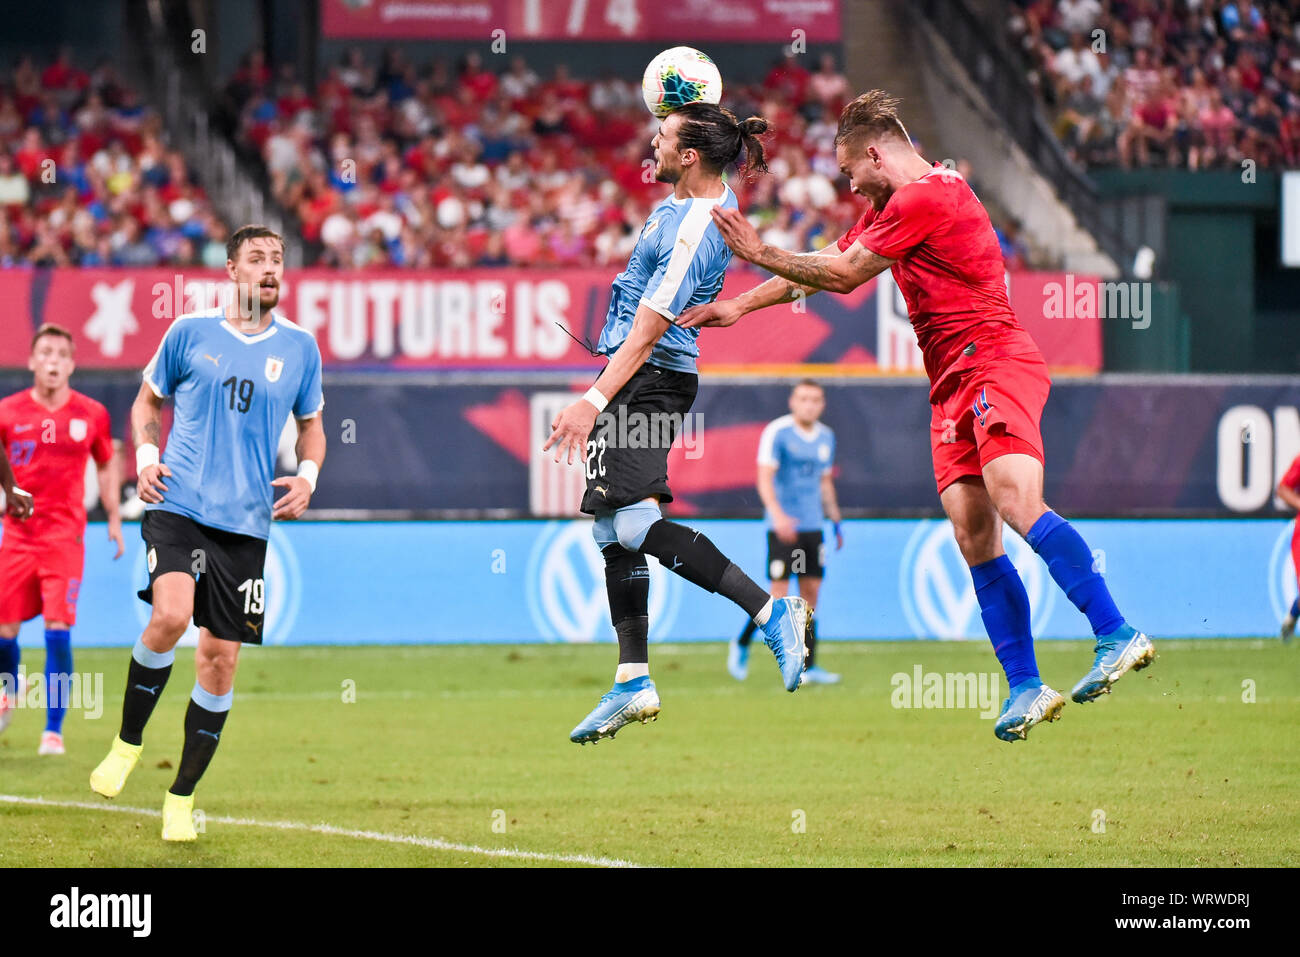 St. Louis, Missouri, USA. 10th Sep, 2019. Uruguay defender Martin Caceres (22) head the crossed ball out of danger during the final match before the Concacaf Nations League as the United States Men's National Team hosted Uruguay at Busch Stadium in St. Louis City, MO Ulreich/CSM/Alamy Live News Stock Photo